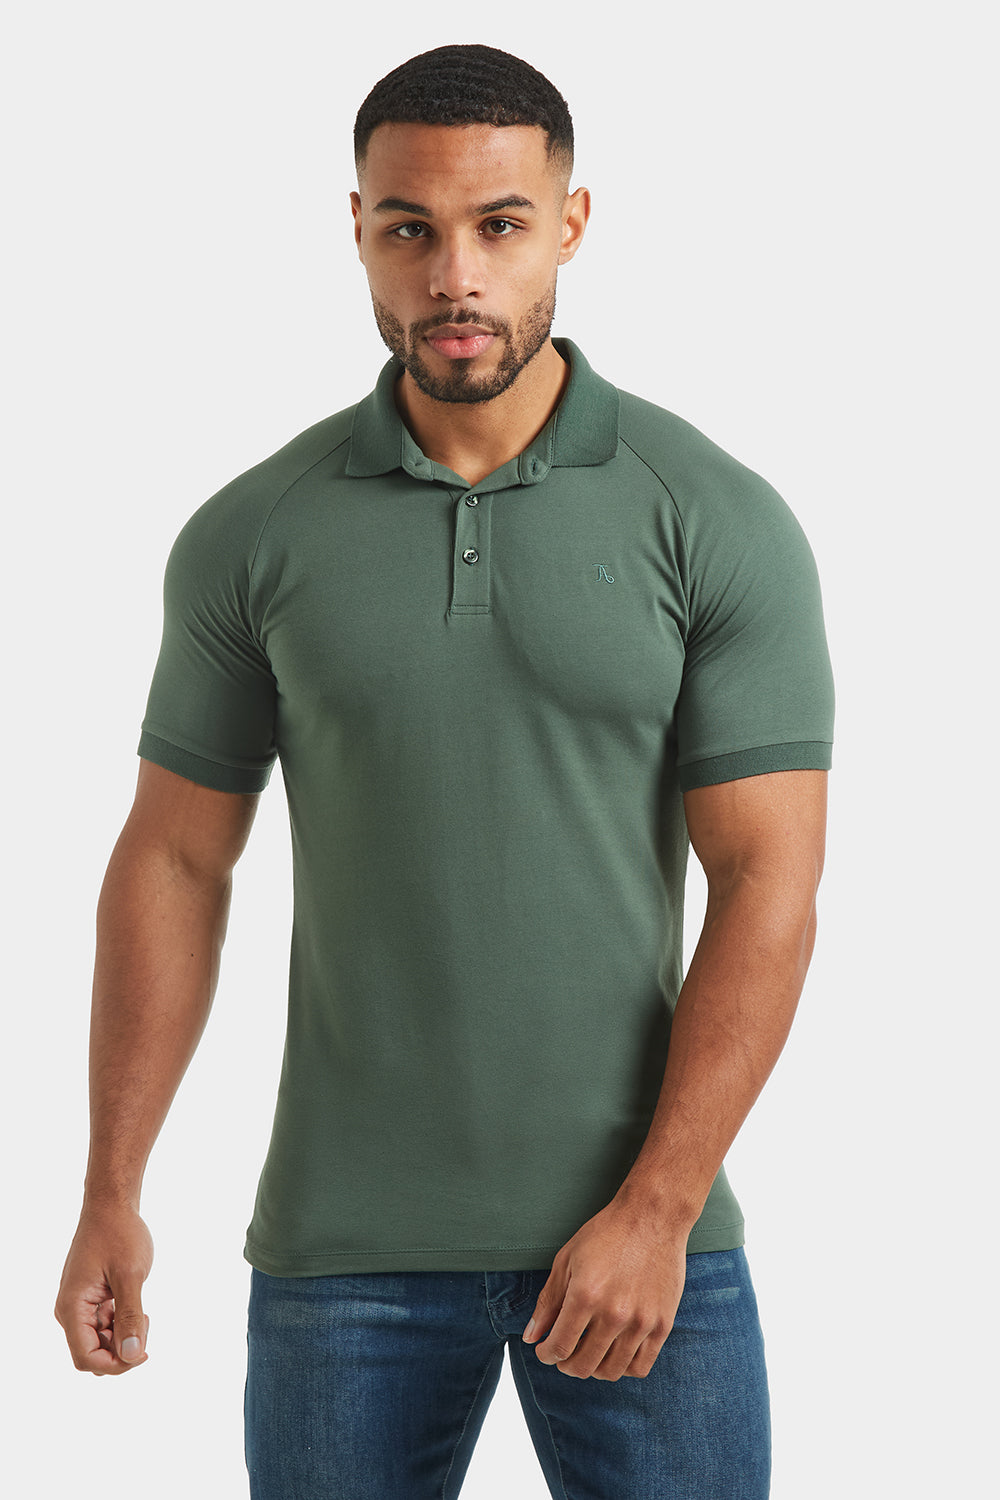 Muscle Fit Polo Shirt in Dark Khaki - TAILORED ATHLETE - ROW